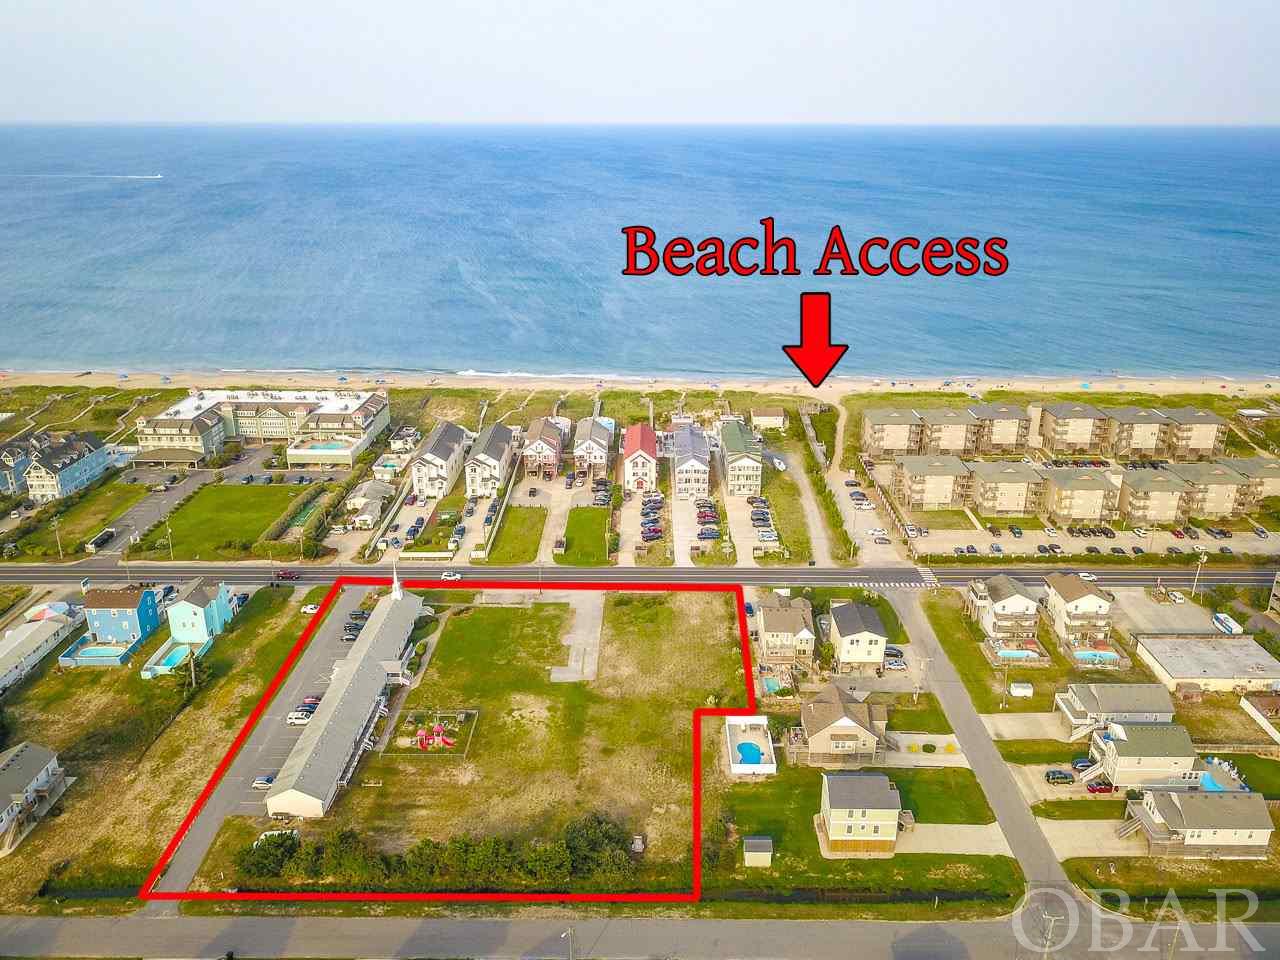 Large commercial semi oceanfront parcel offering Mixed Use possibilities. 1.98 acre lot in the heart of Kill Devil Hills. Prime location with 300' fronting Virginia Dare Trail (the Beach Rd/Route 12). Building on the property currently being used as a church. Access the beach at nearby Clark St. public access with parking. Convenient access to the 158 Bypass with a traffic light at Baum St. One of the largest semi oceanfront parcels available for development.